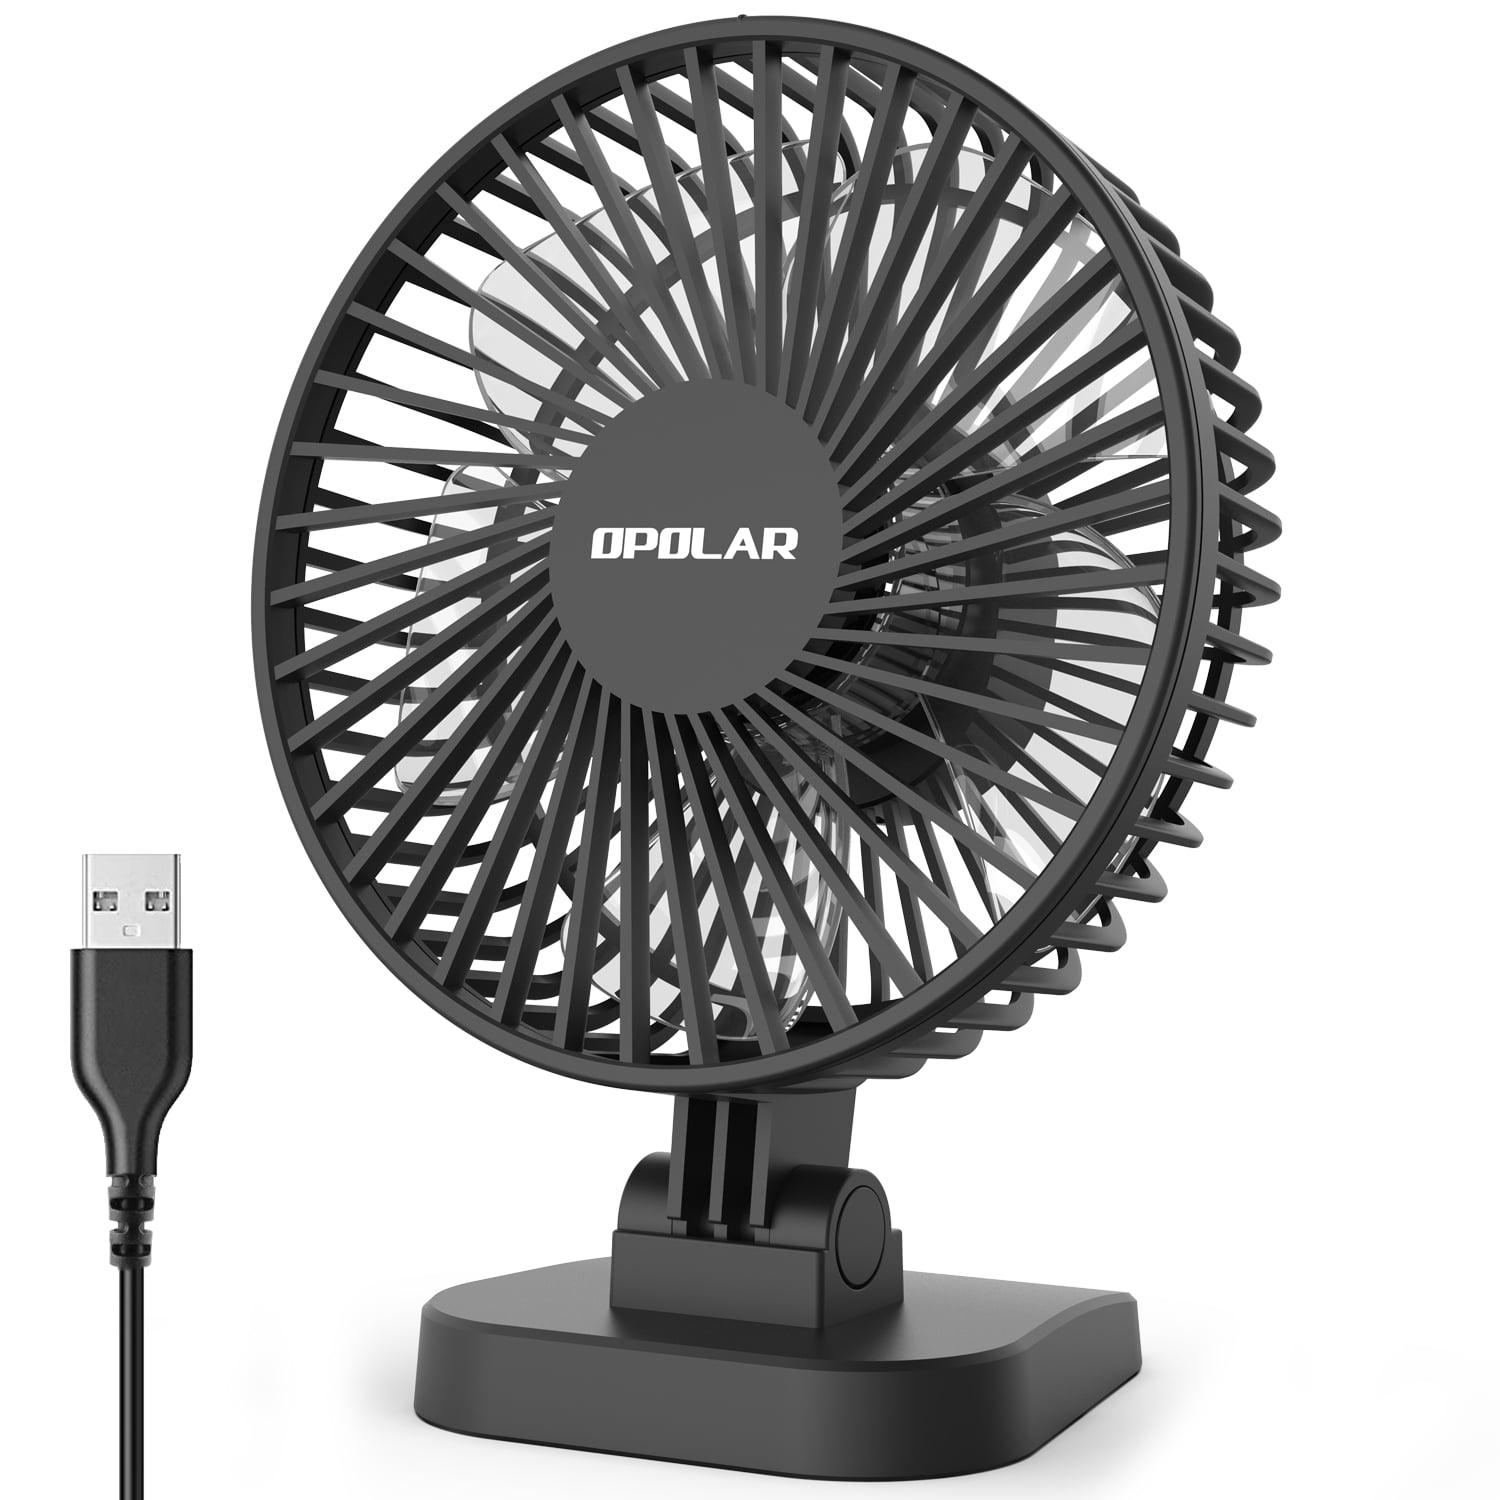 White infray USB Desk Fan Rechargeable Portable Table Fan with Night Breathing Light Air Circulator 120° Auto Oscillating Foldable Quiet Desktop Personal Fan with 4 Speeds Setting for Home Office 